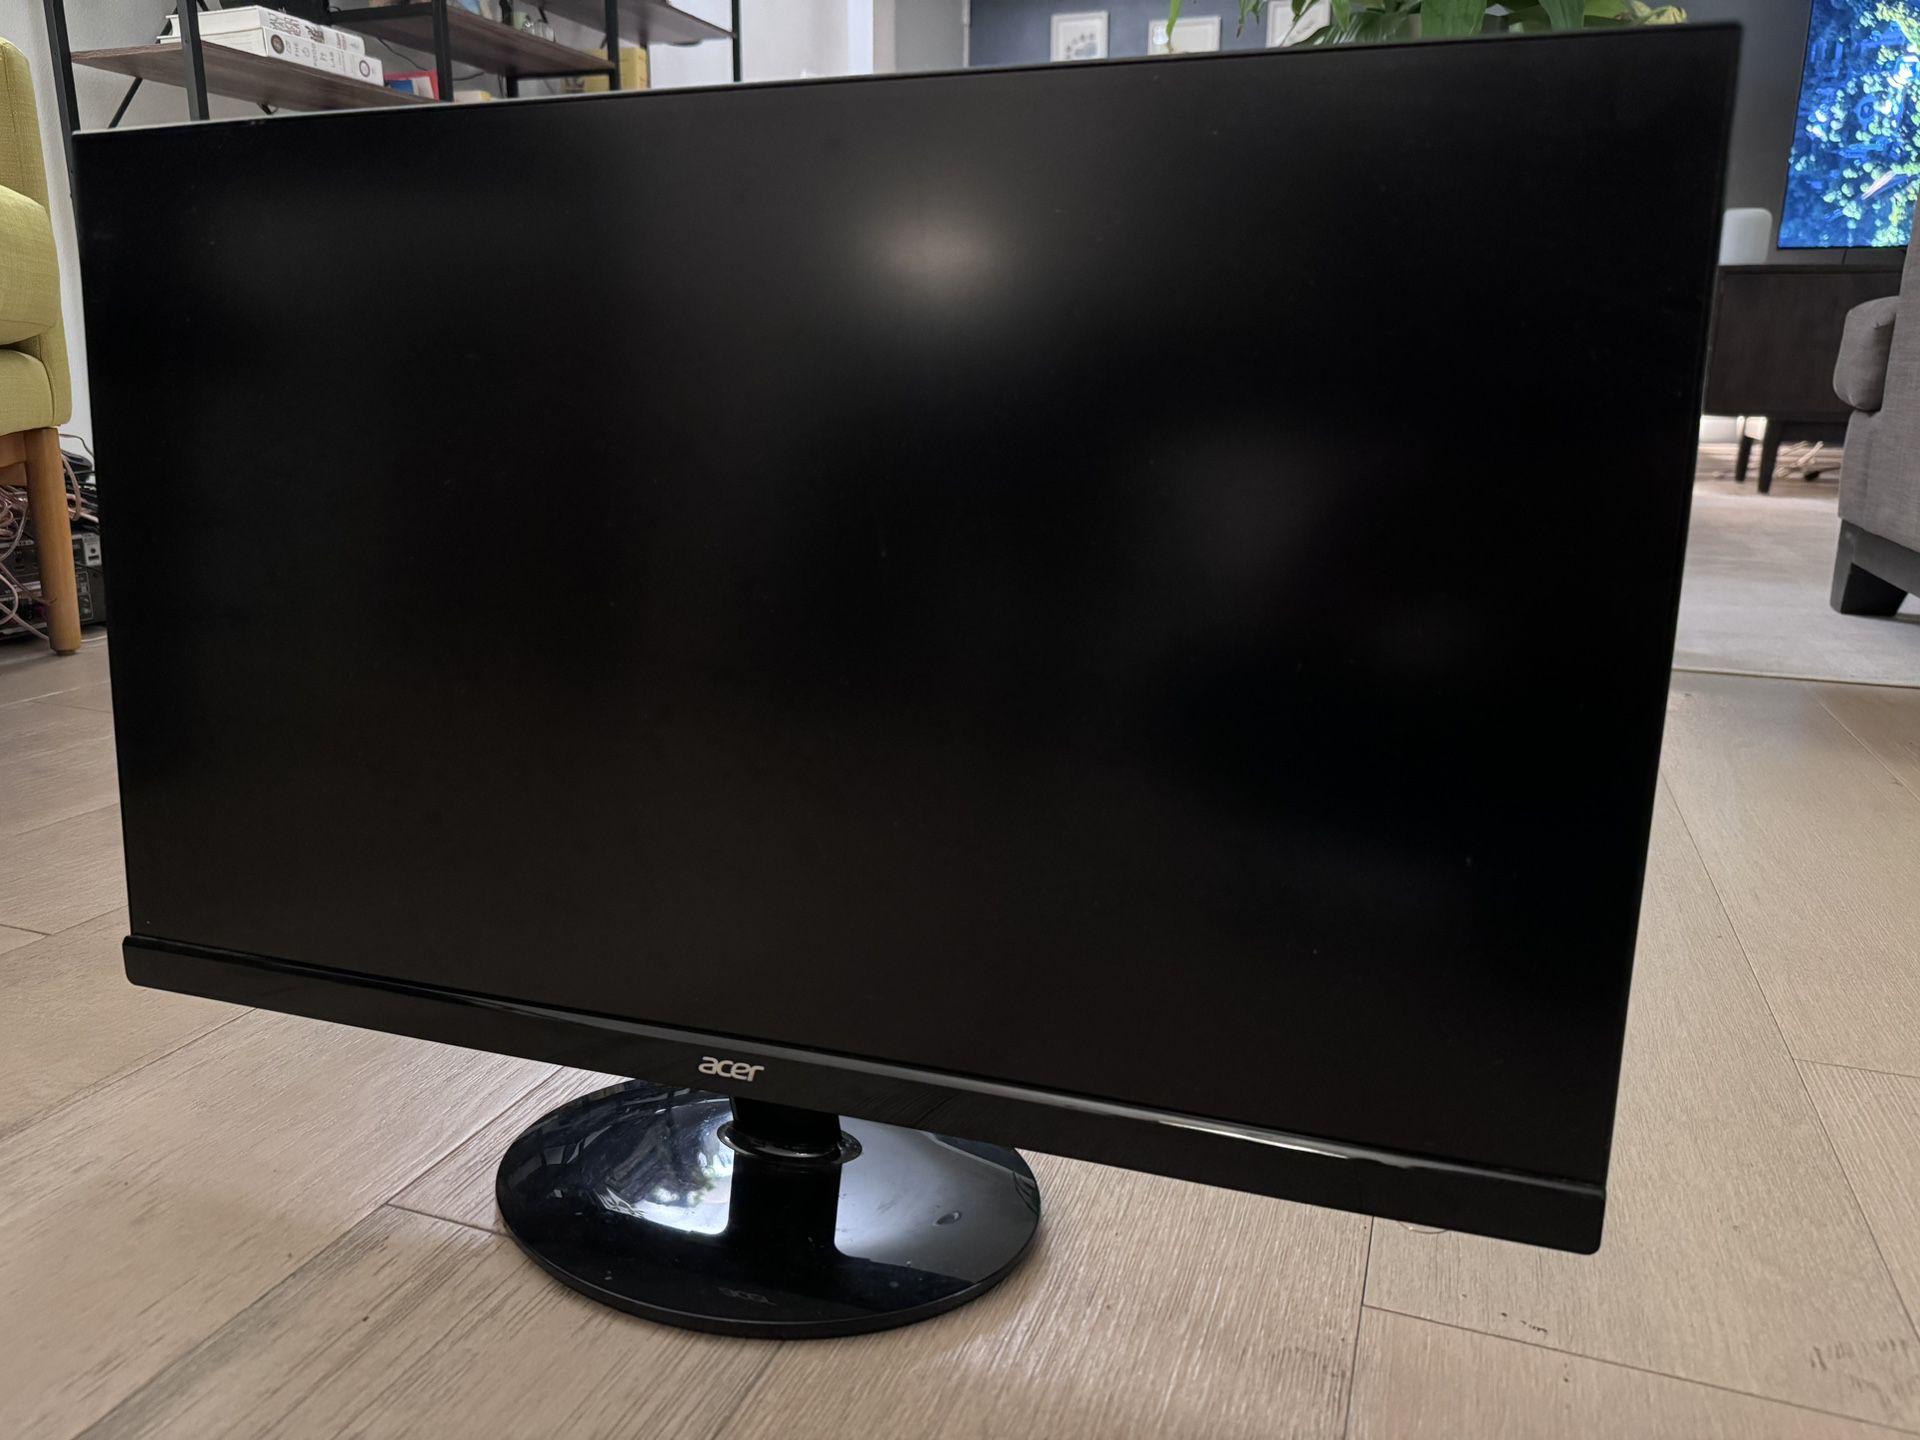 Acer 27” LCD Monitor (s271hl)